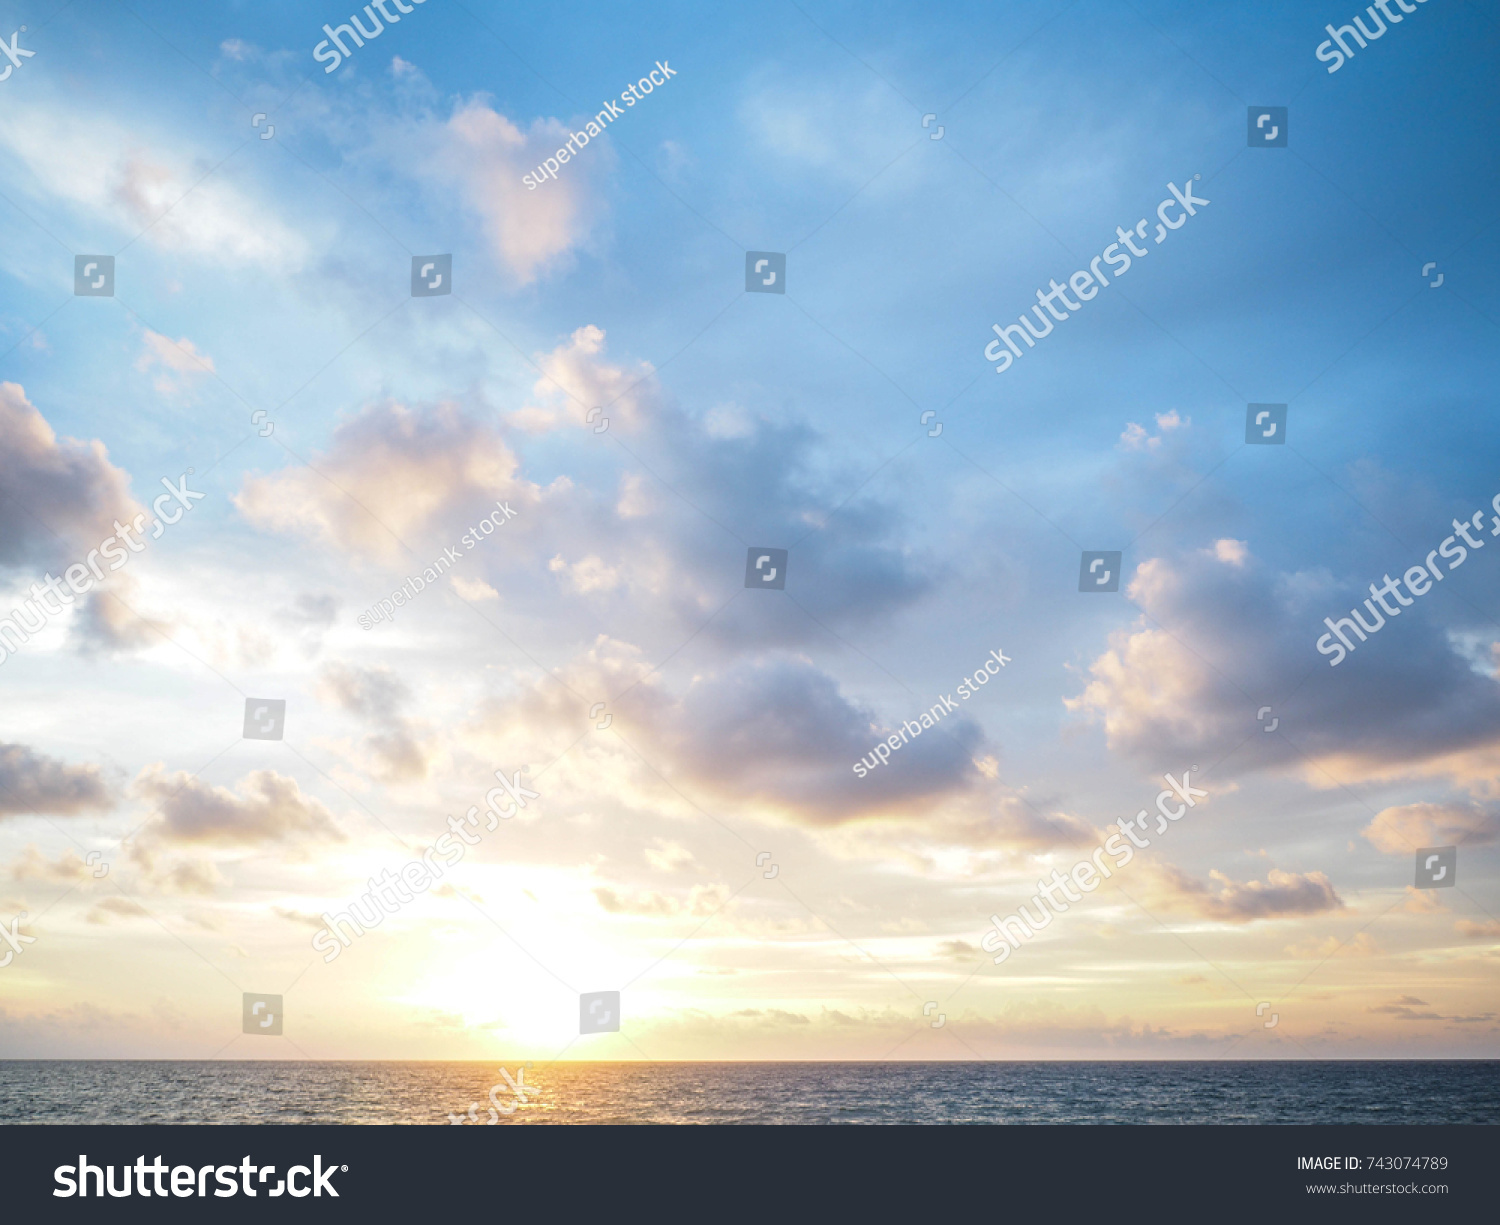 blue sky with clouds and sea, sunset #743074789